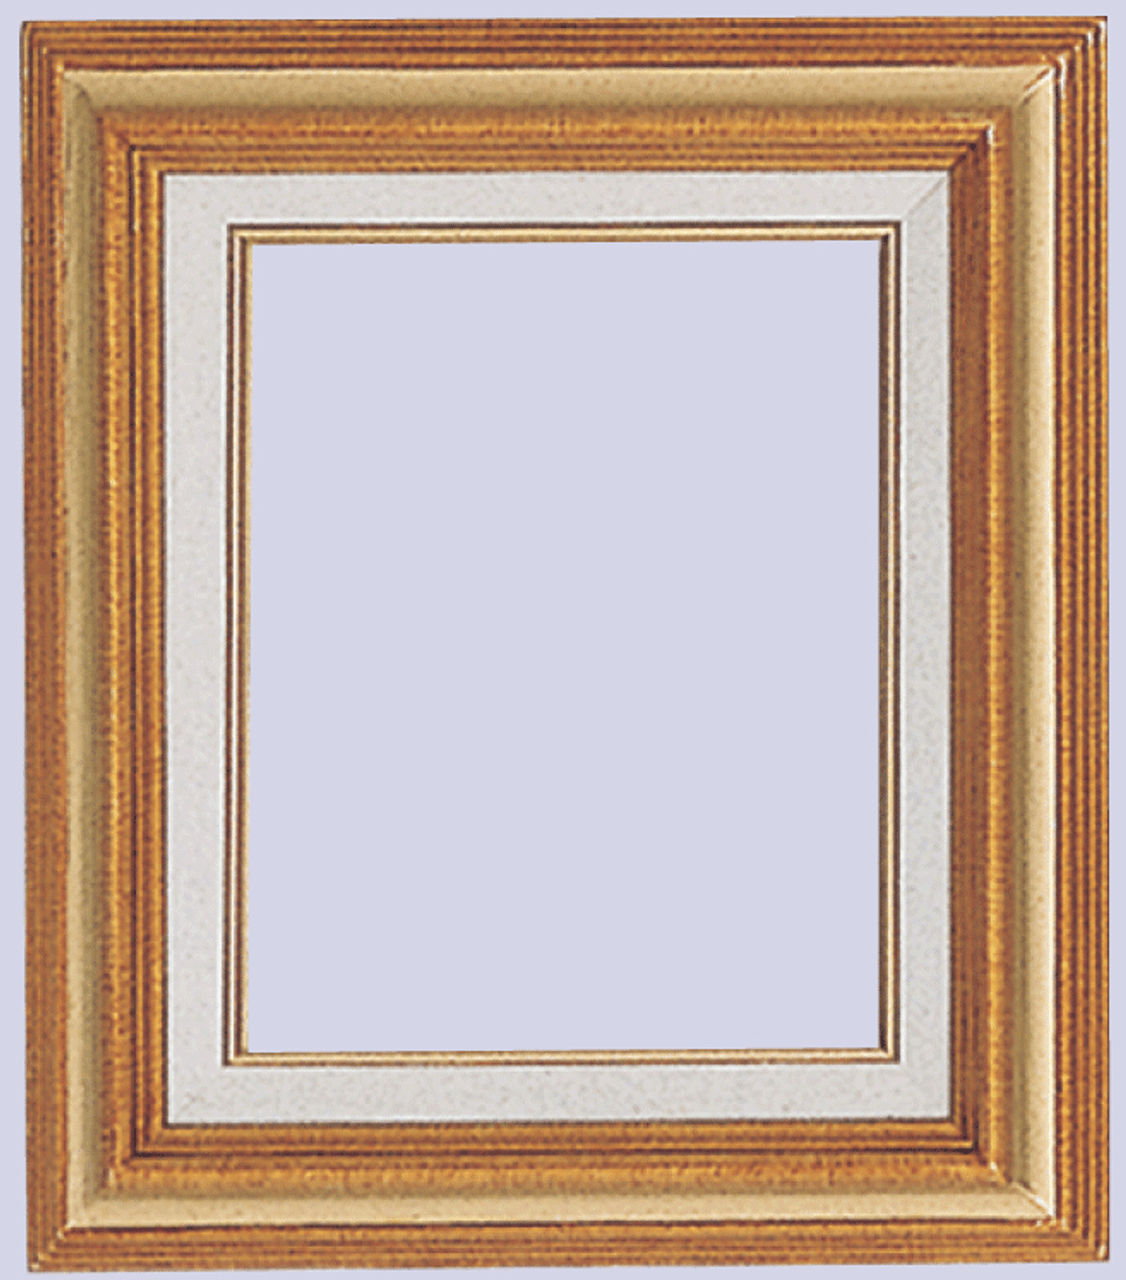 3 Inch Econo Wood Frames With Linen Liners: 48X72*